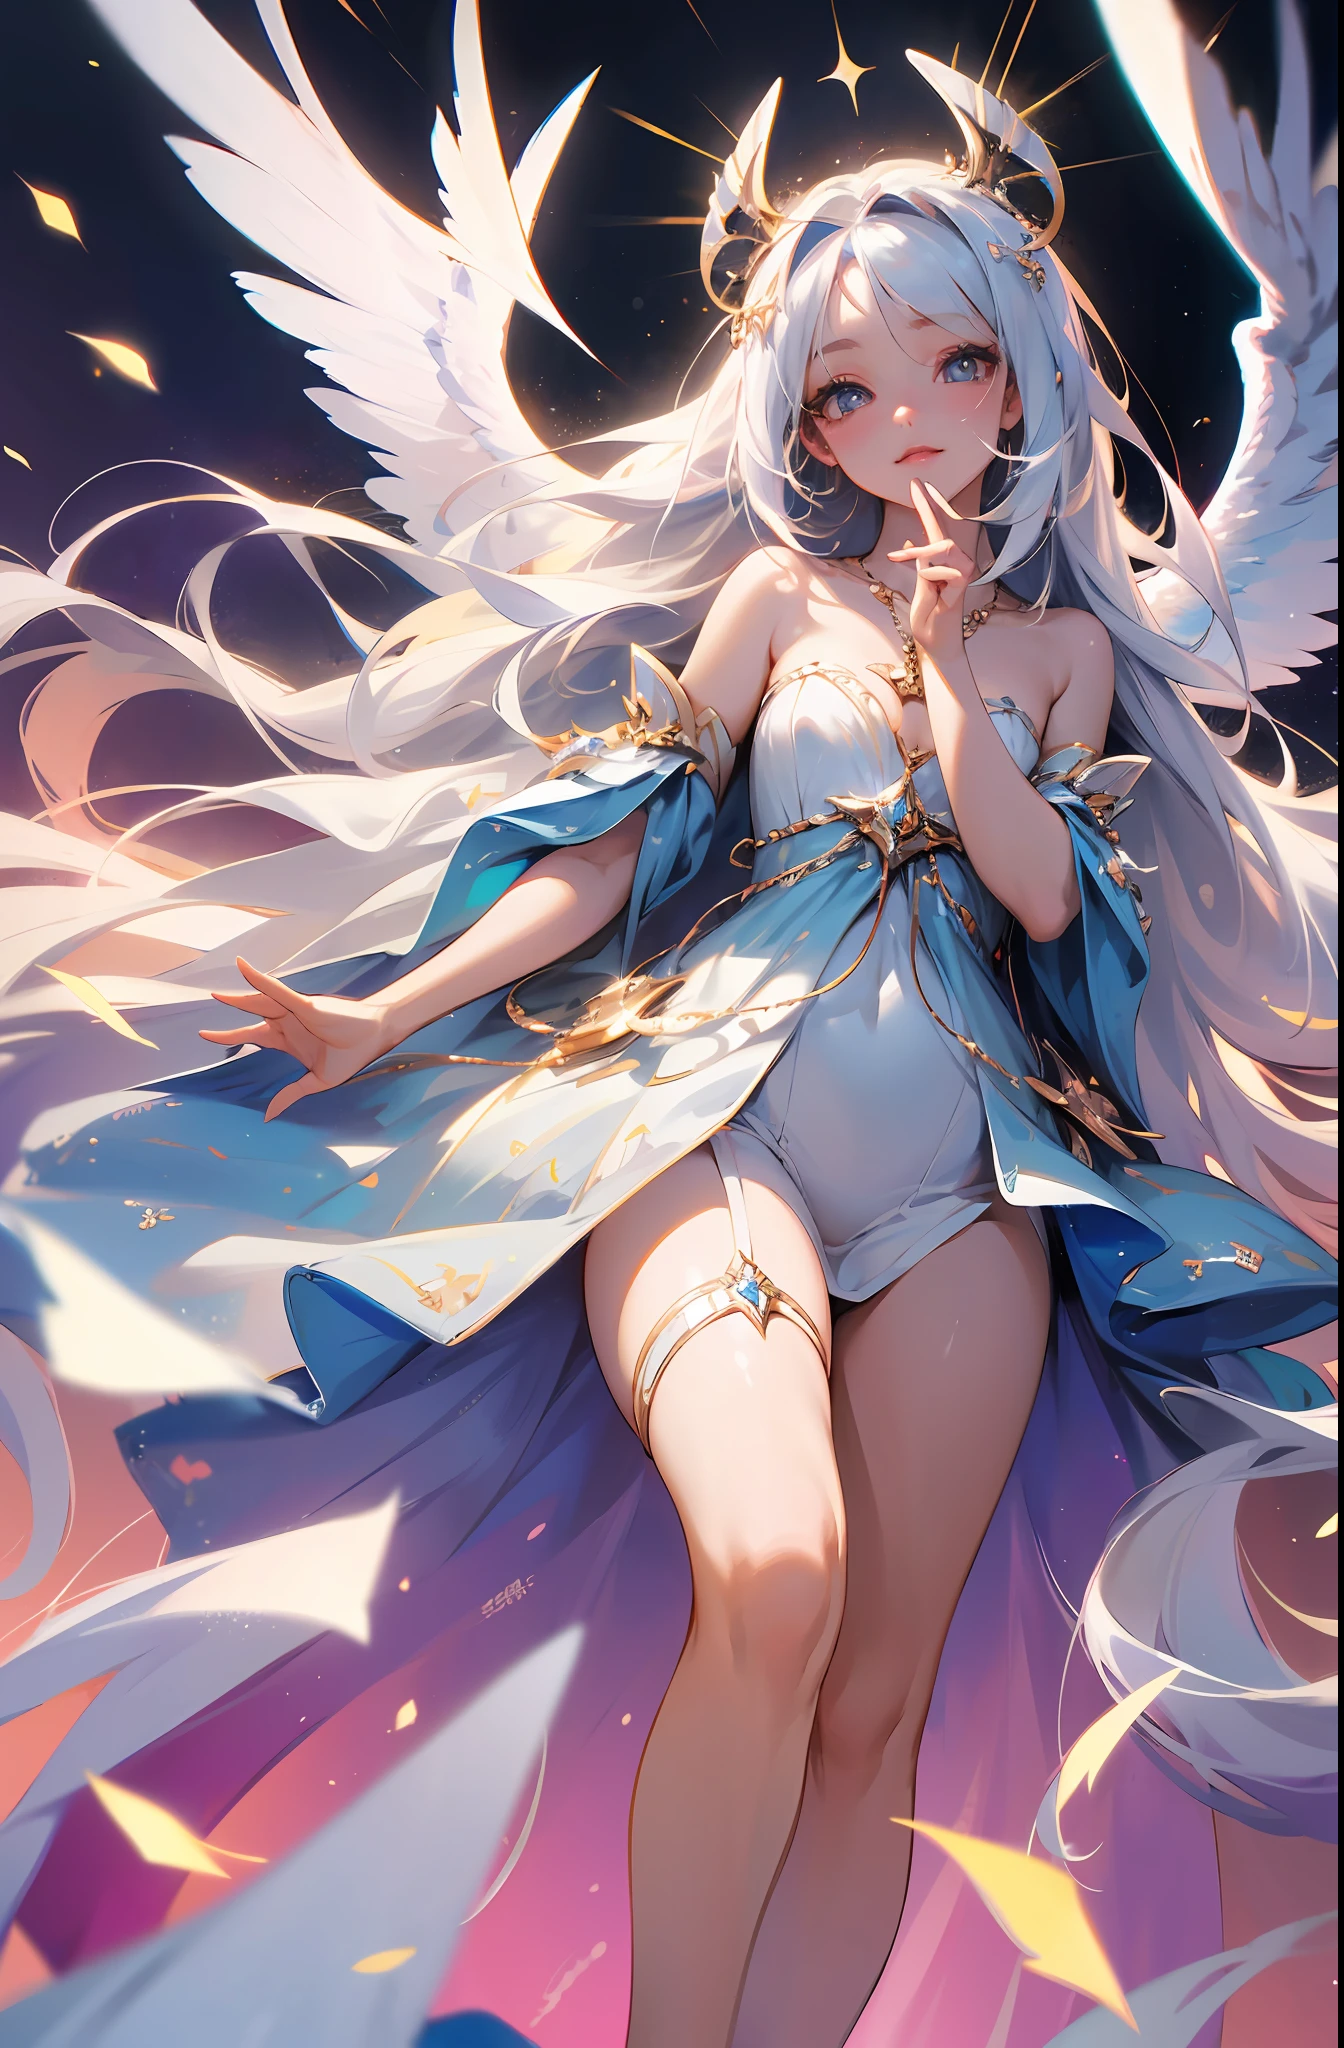 (Masterpiece: 1.4), (Best Quality: 1.4), (Very Cute Angel Girl, Super Detailed Face, Jewel-like Eyes, White Very Long Hair, Colorful Gradient Hair: 1.4), (Angel Ring:
1.4), (Angel Wings: 1.4), (Full body, perfect 2 arms, perfect 2 legs: 1.4), Perfect 4 fingers: 1 thumb, light, shine, bokeh, super fine